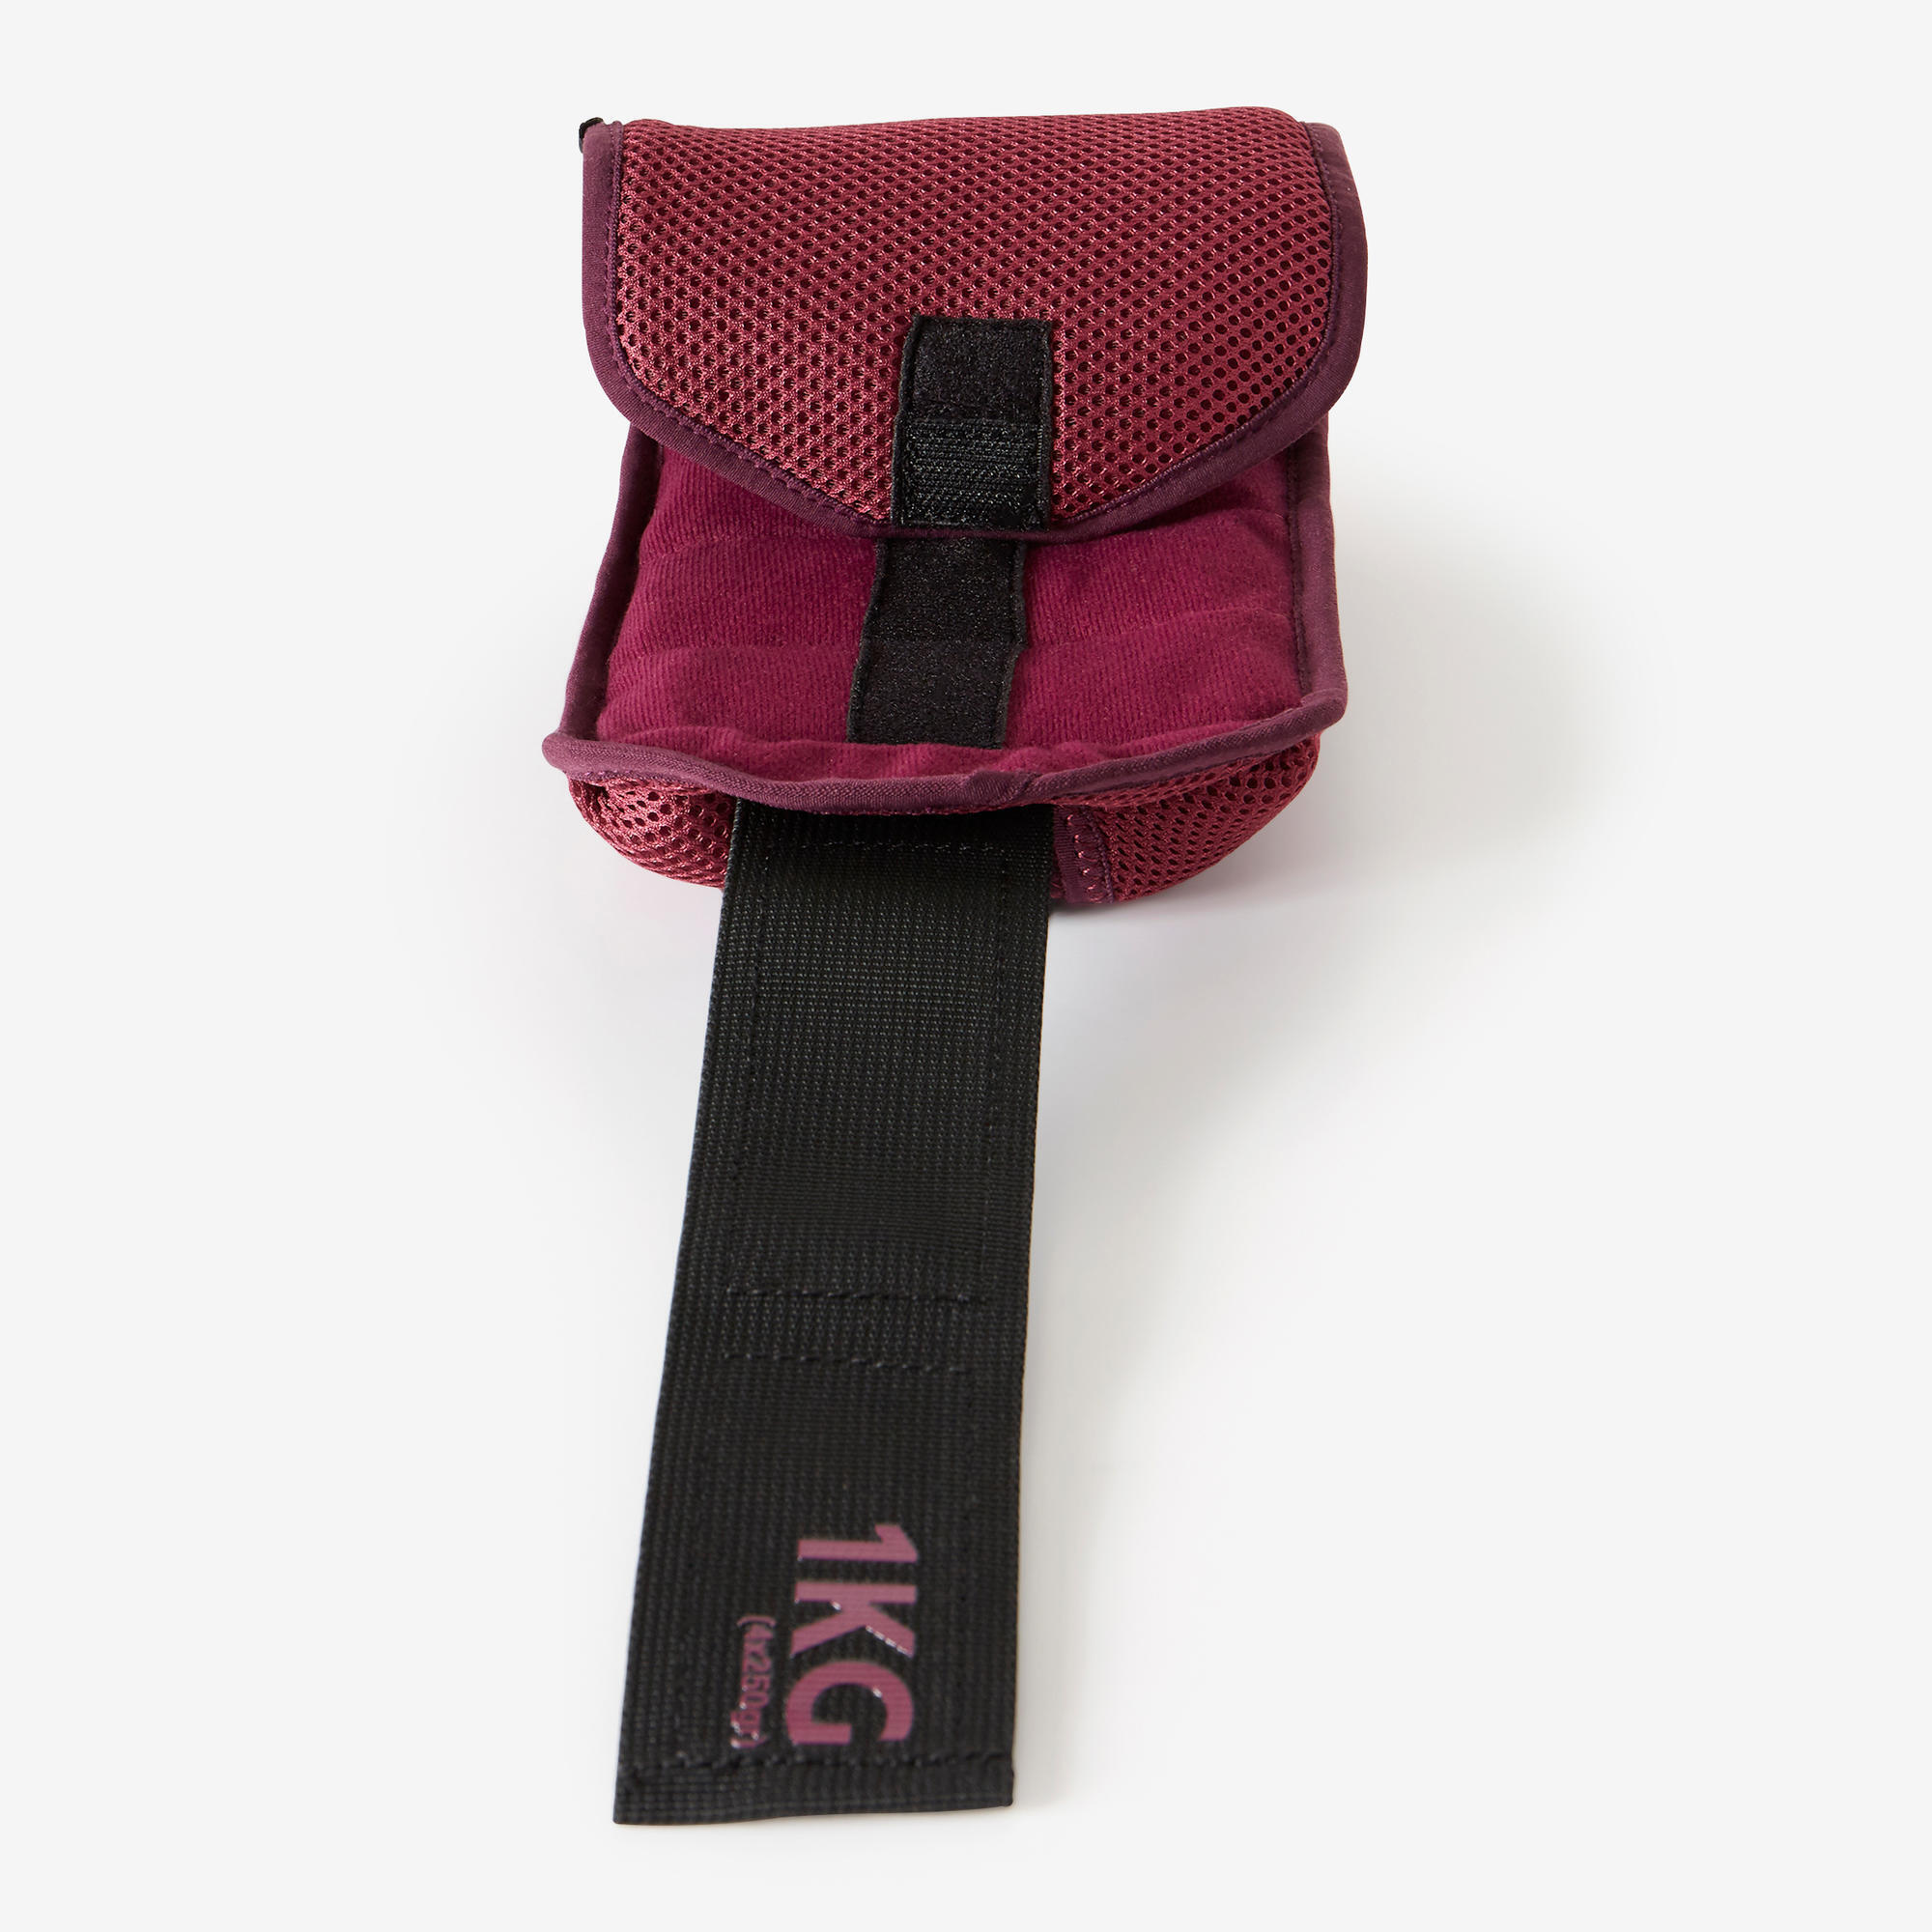 1 kg Adjustable Wrist / Ankle Weights Twin-Pack - Burgundy 3/5